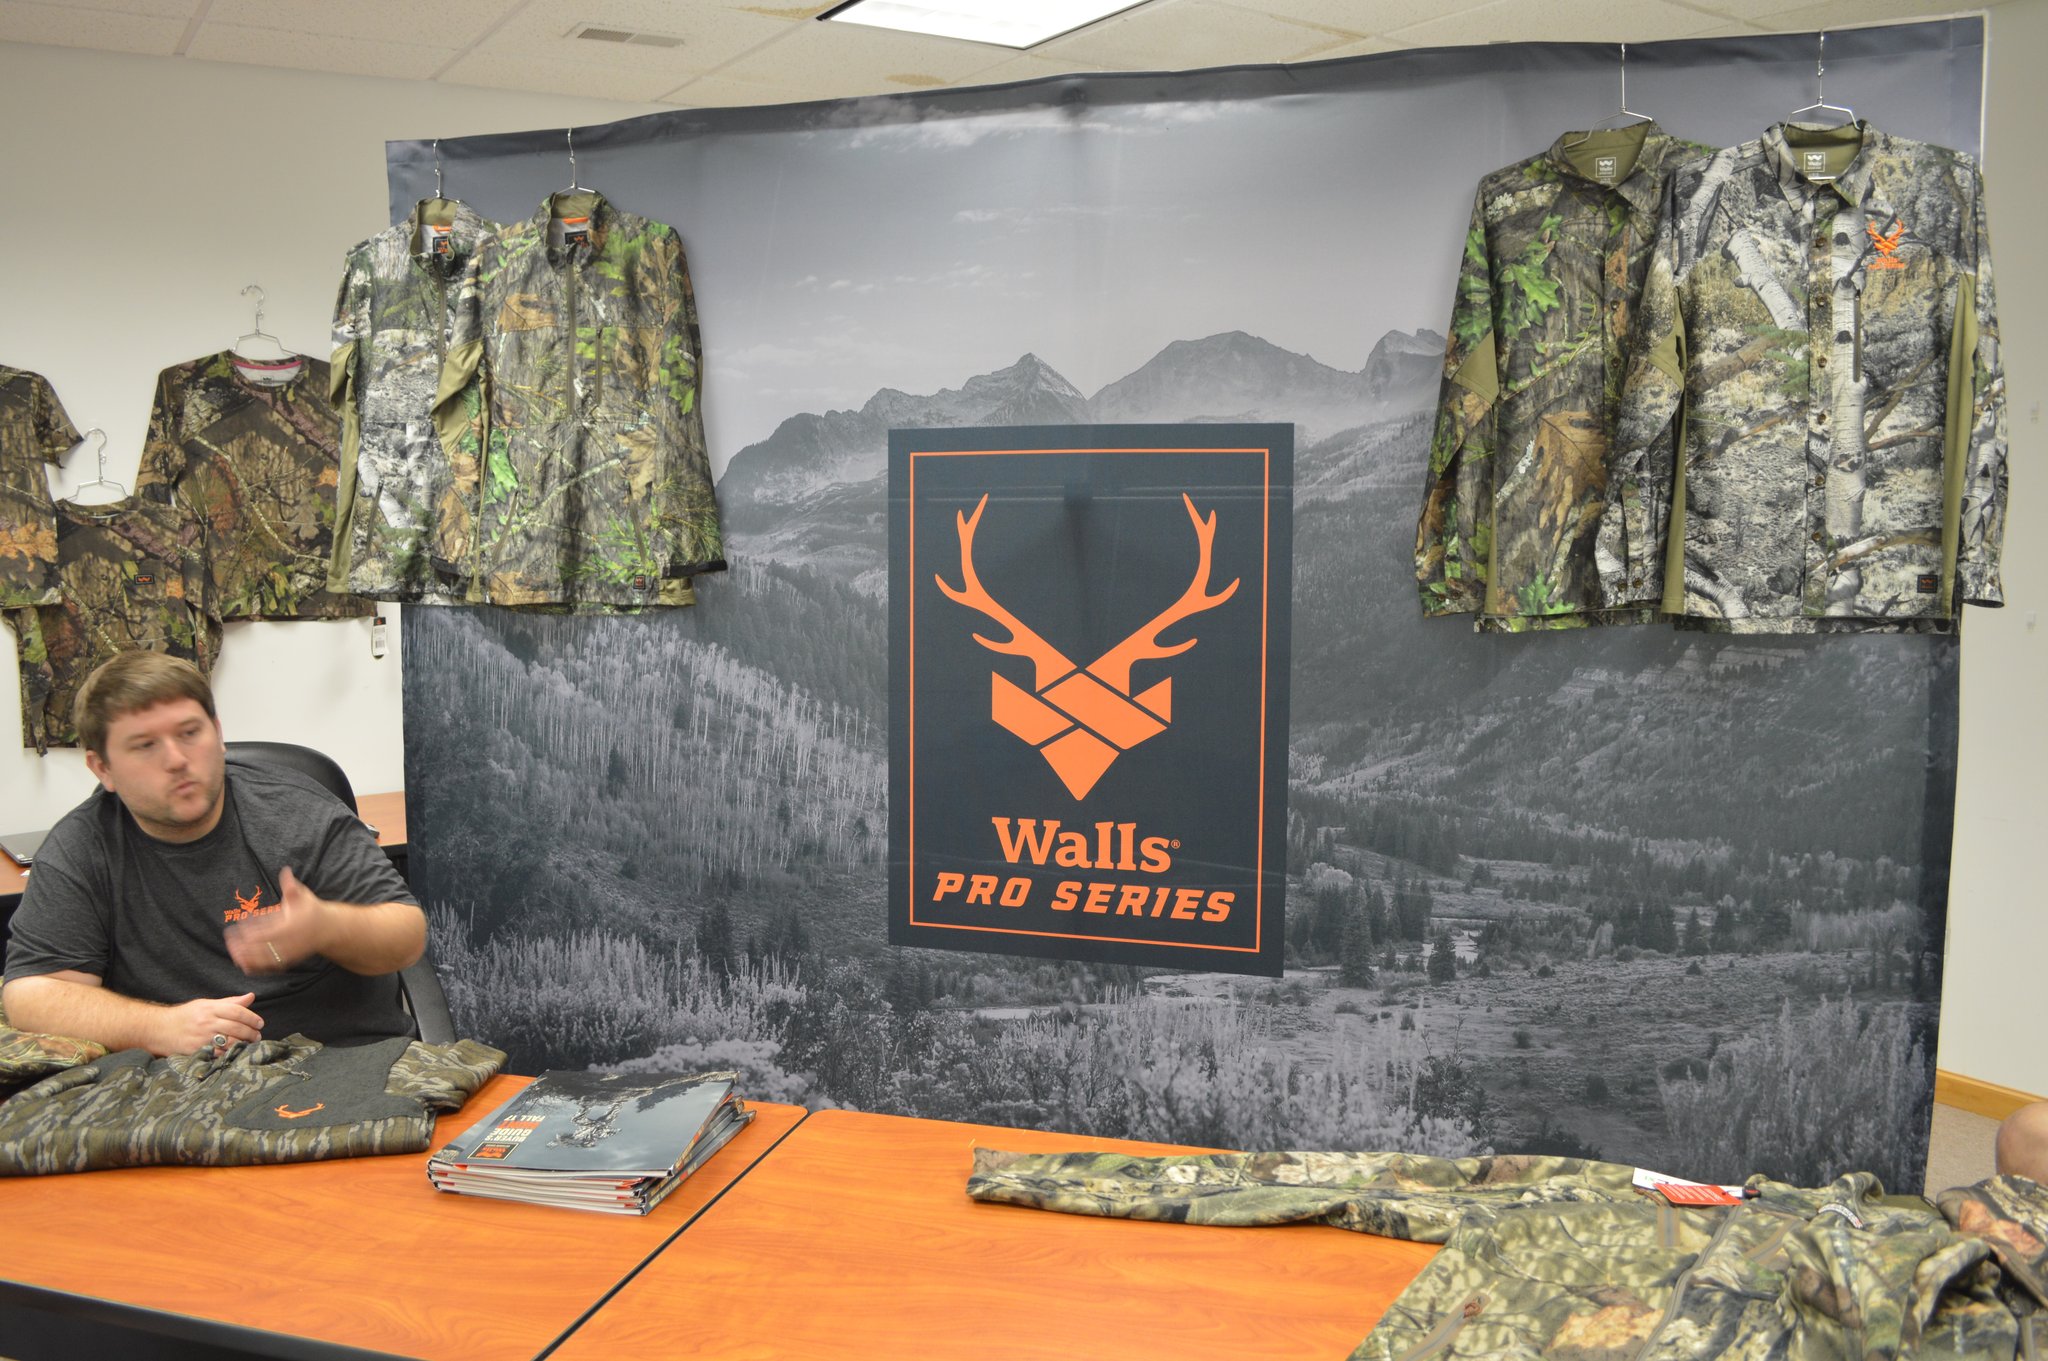 The company once branded as 10X hunting apparel, is now branded as Walls. They offer a wide variety of hunting garments, with something for every season, and women’s and childrens lines as well. (Photo: Kristin Alberts)